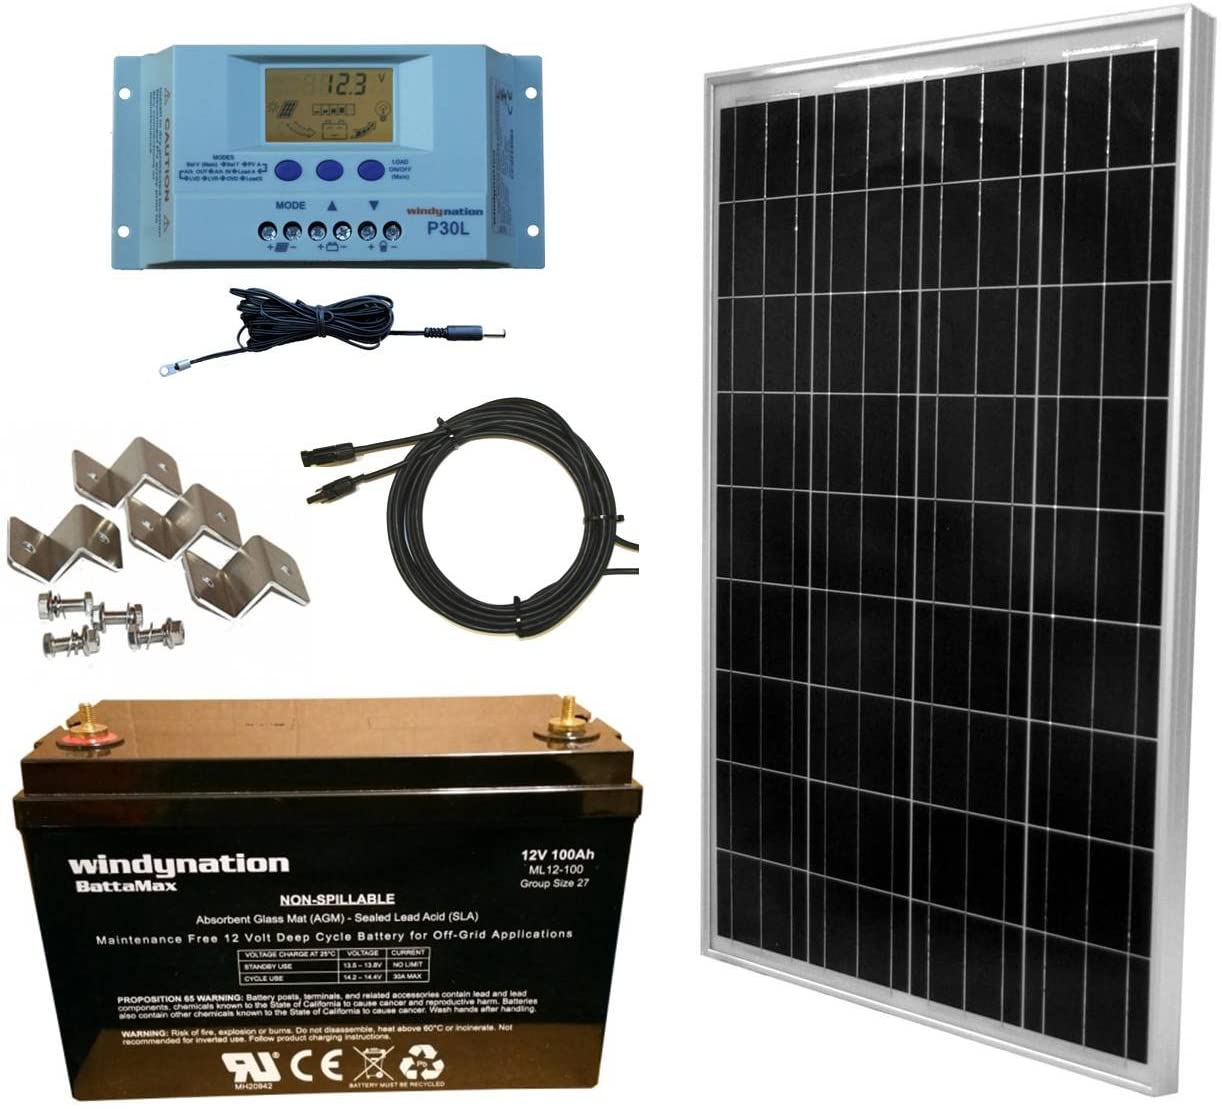  WindyNation 100 Watt Solar Panel Complete Off-Grid RV Boat Kit with P30L LCD PWM Charge Controller, Solar Cable, Mounting Brackets + 100Ah AGM Deep Cycle